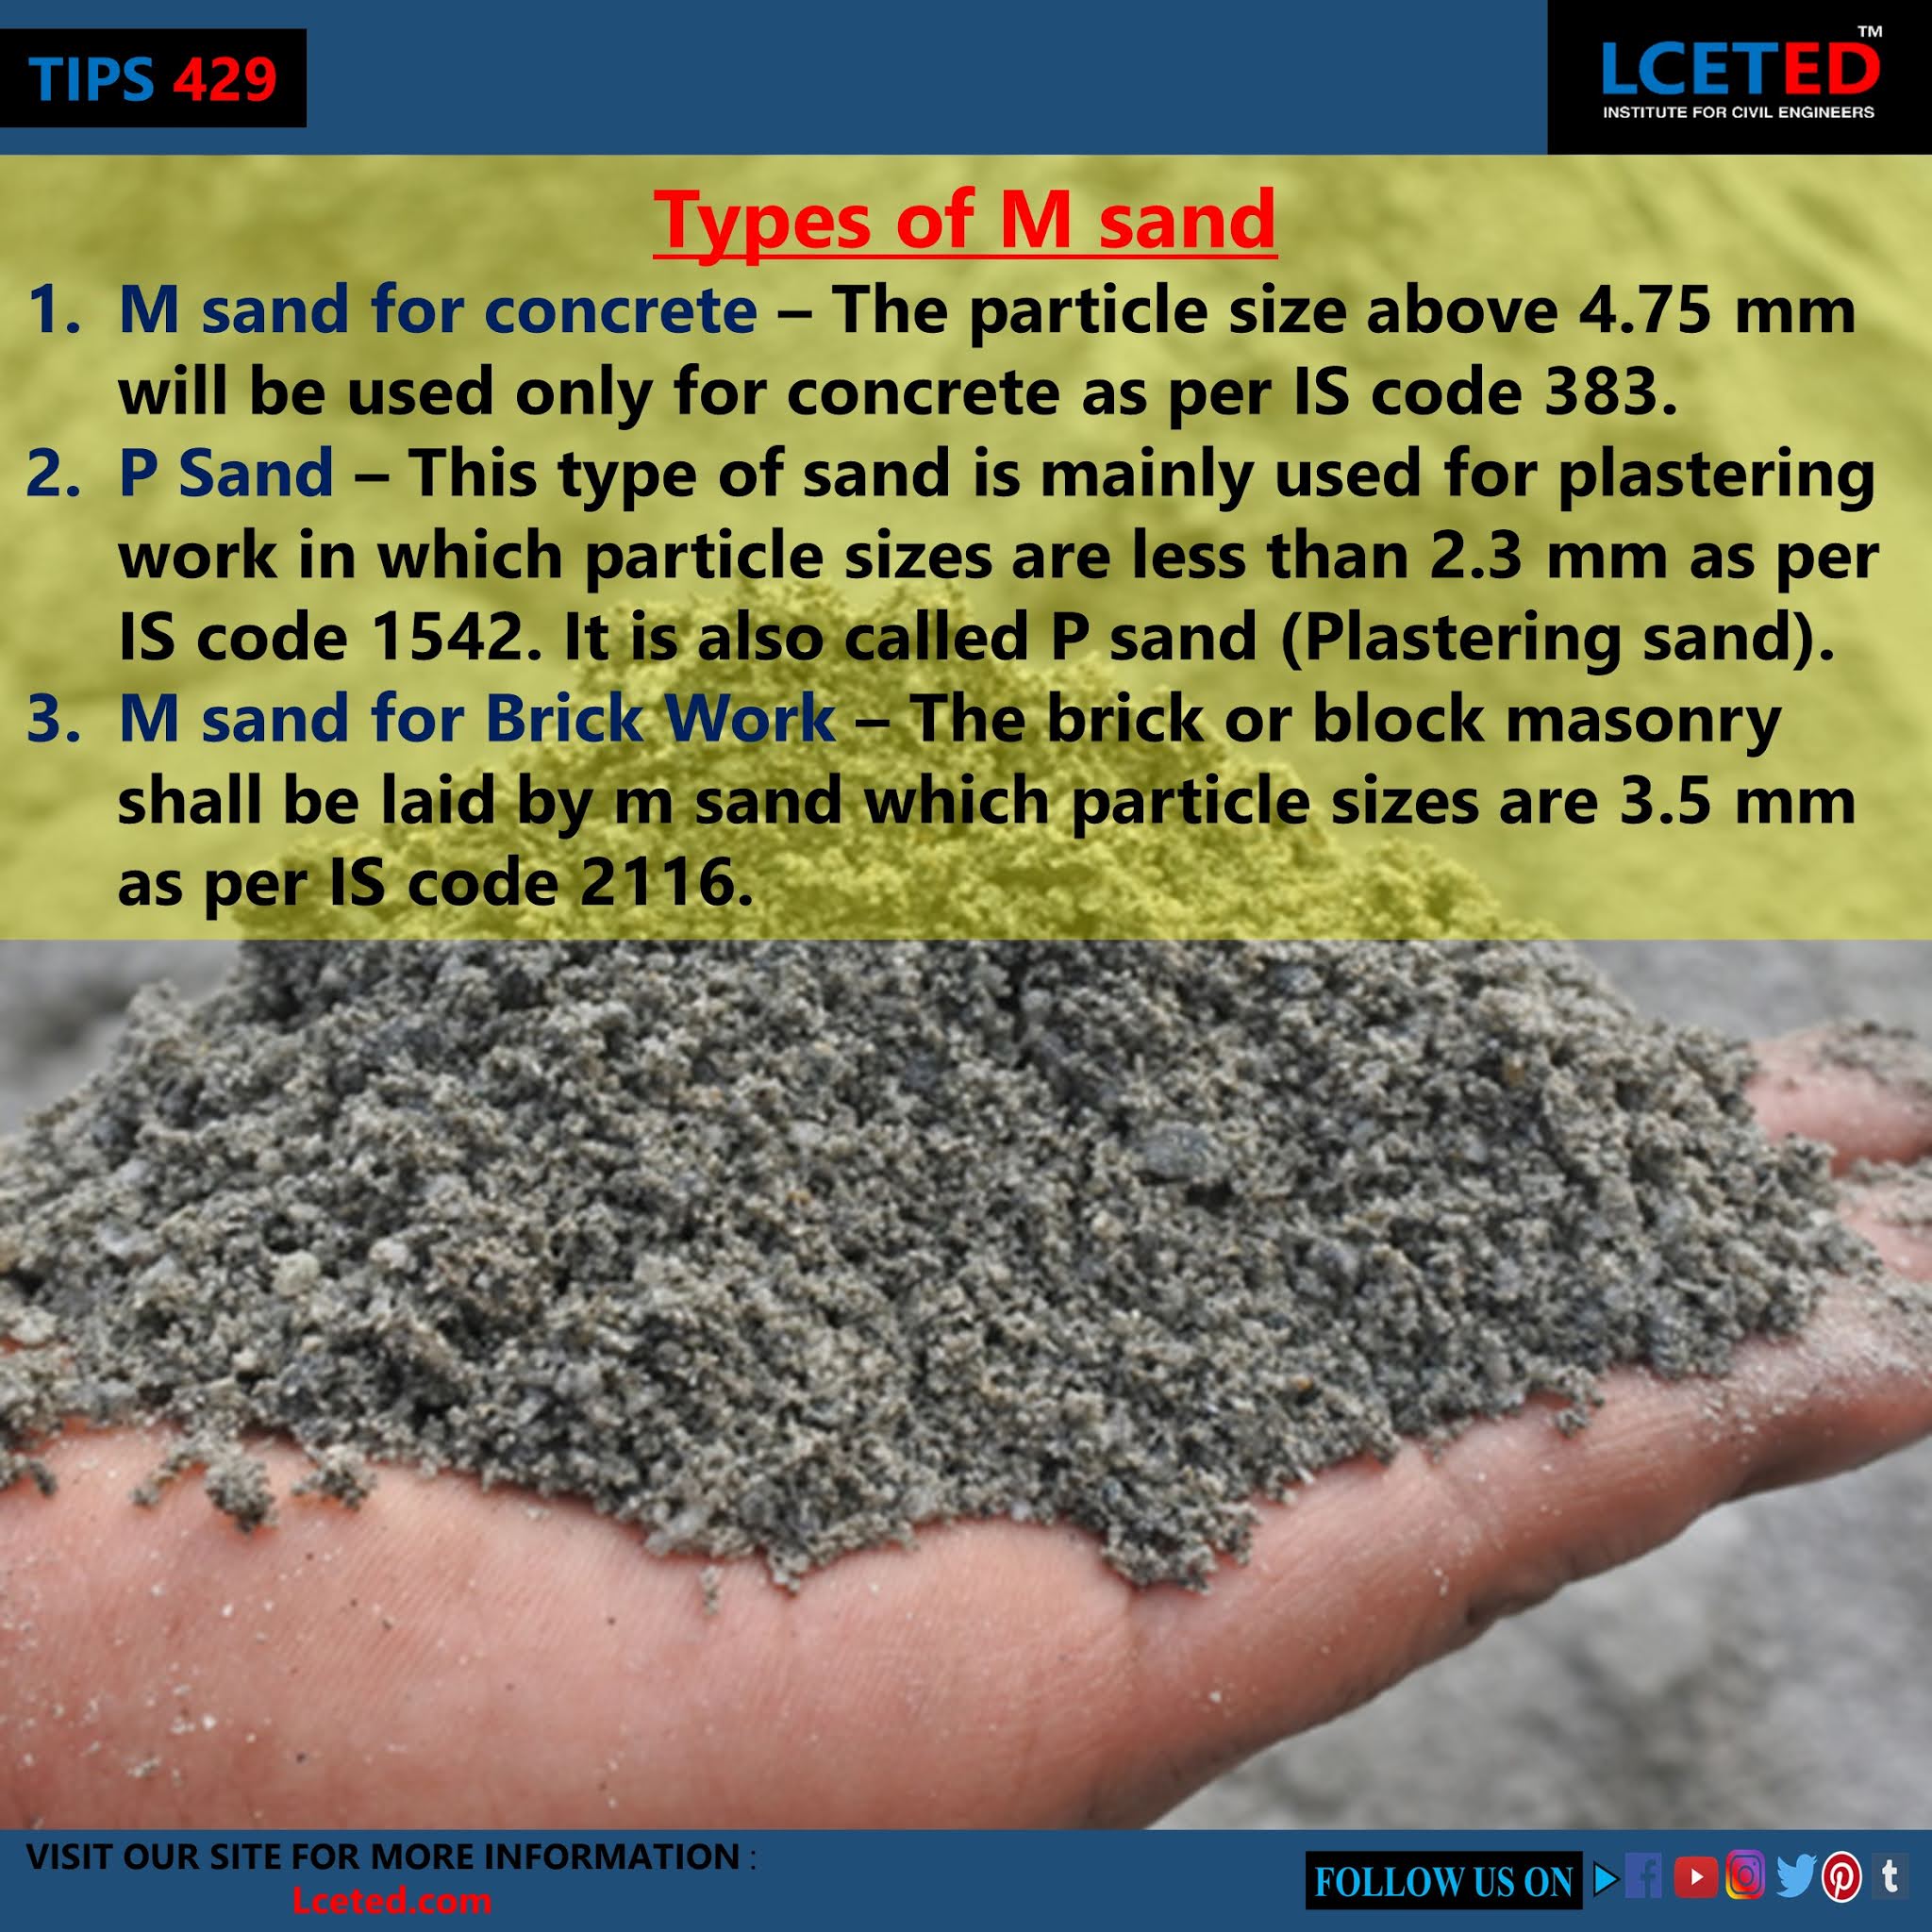 TYPES OF SAND | Pit Sand | River Sand | M-Sand (Manufactured Sand